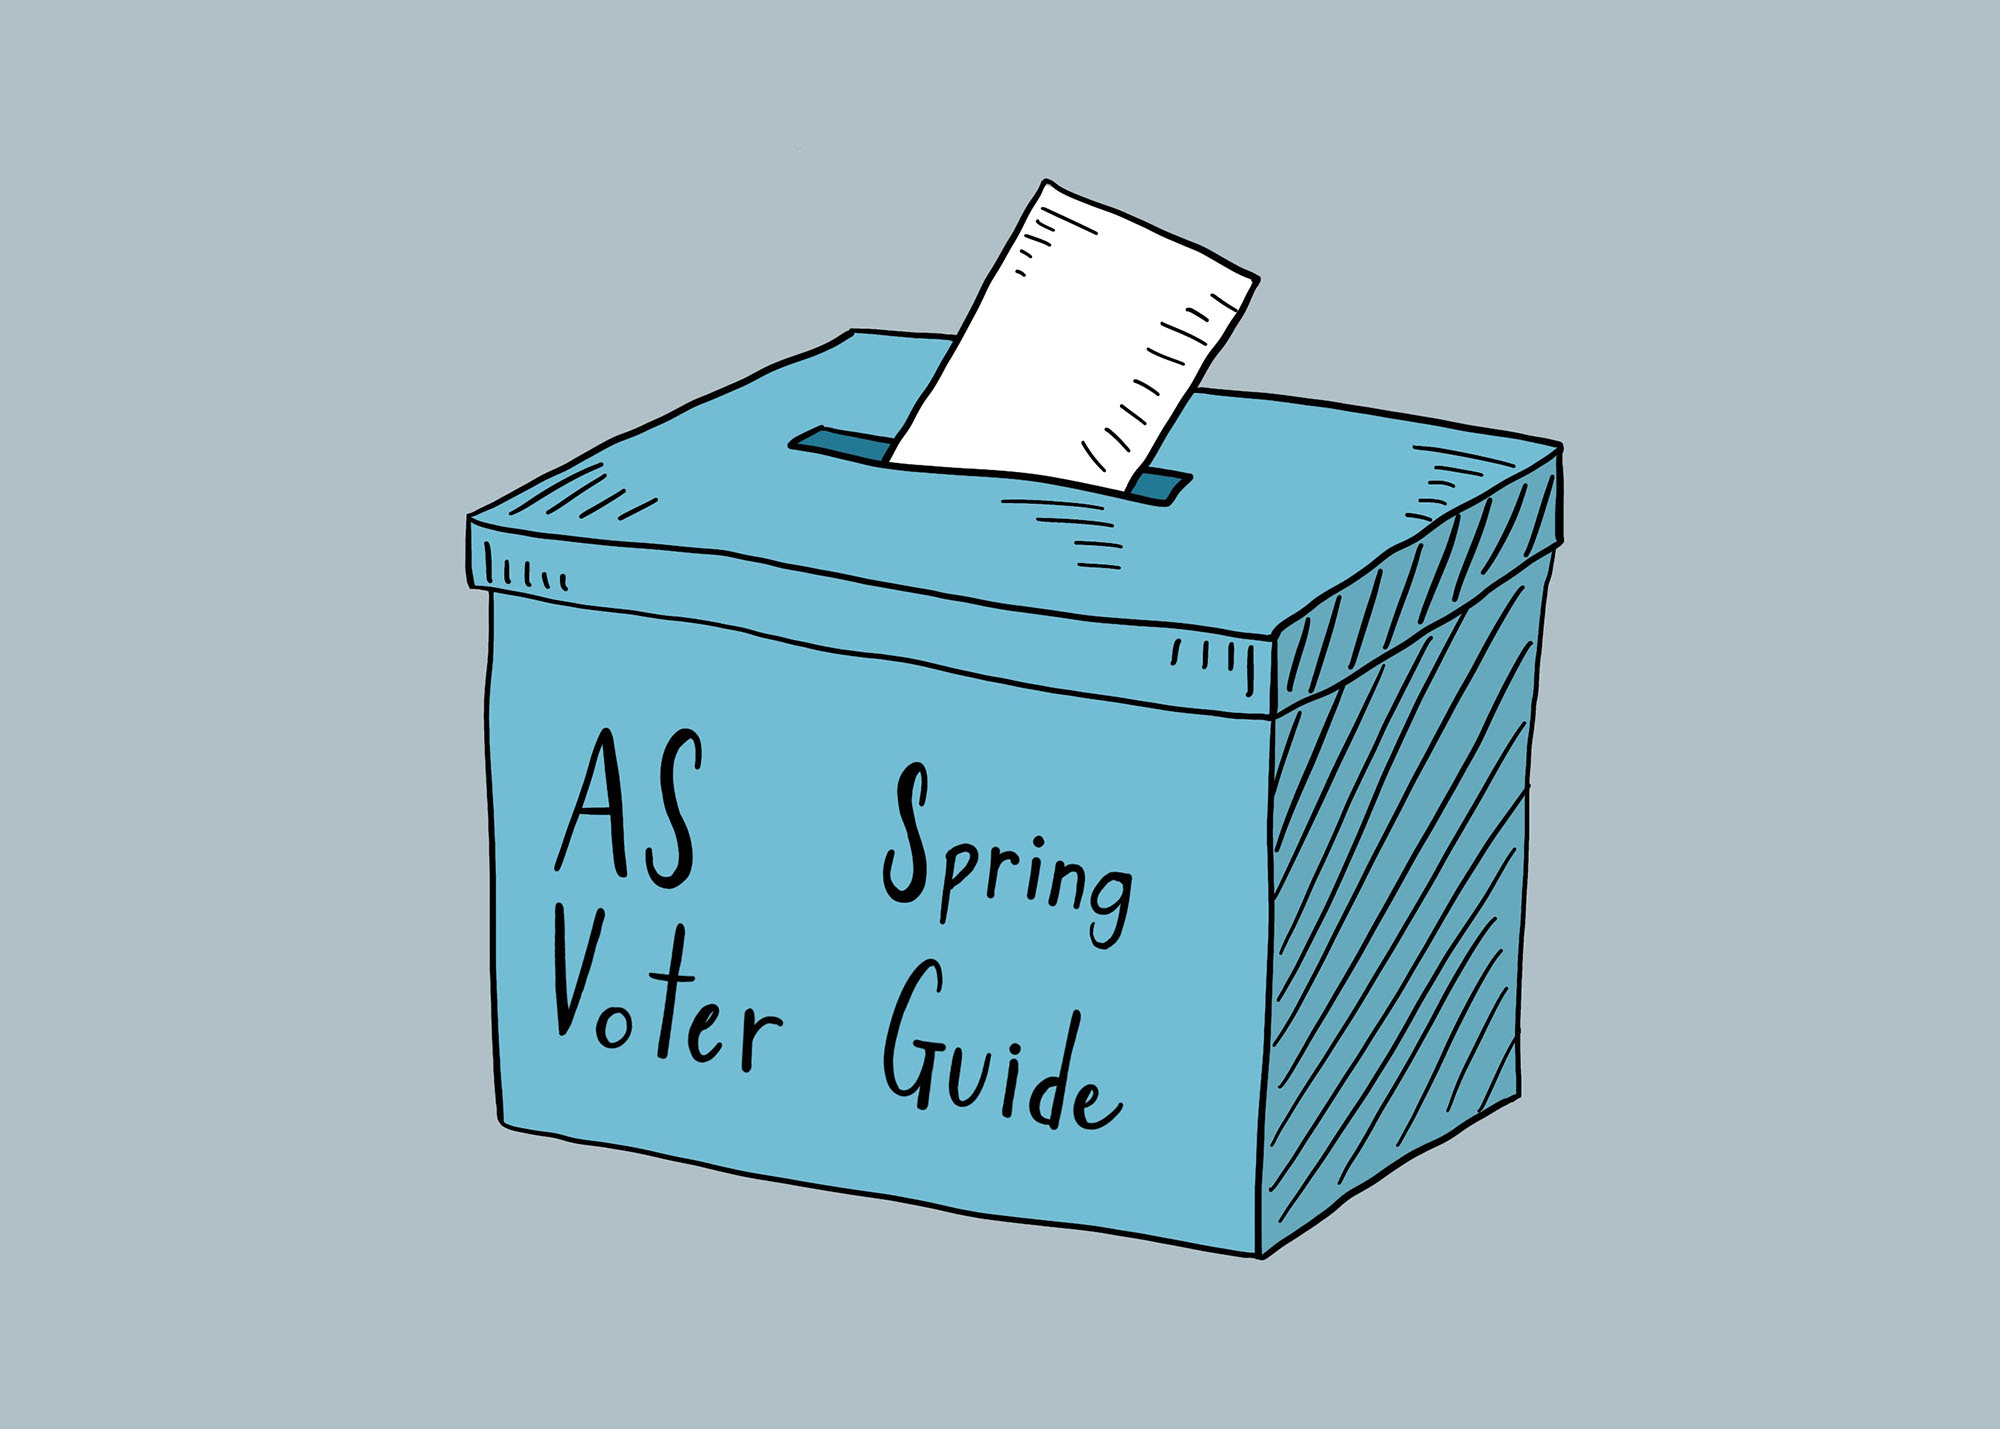 Graphic of a voting box with a ballot going in. "AS Spring Voter Guide" is written on the side.